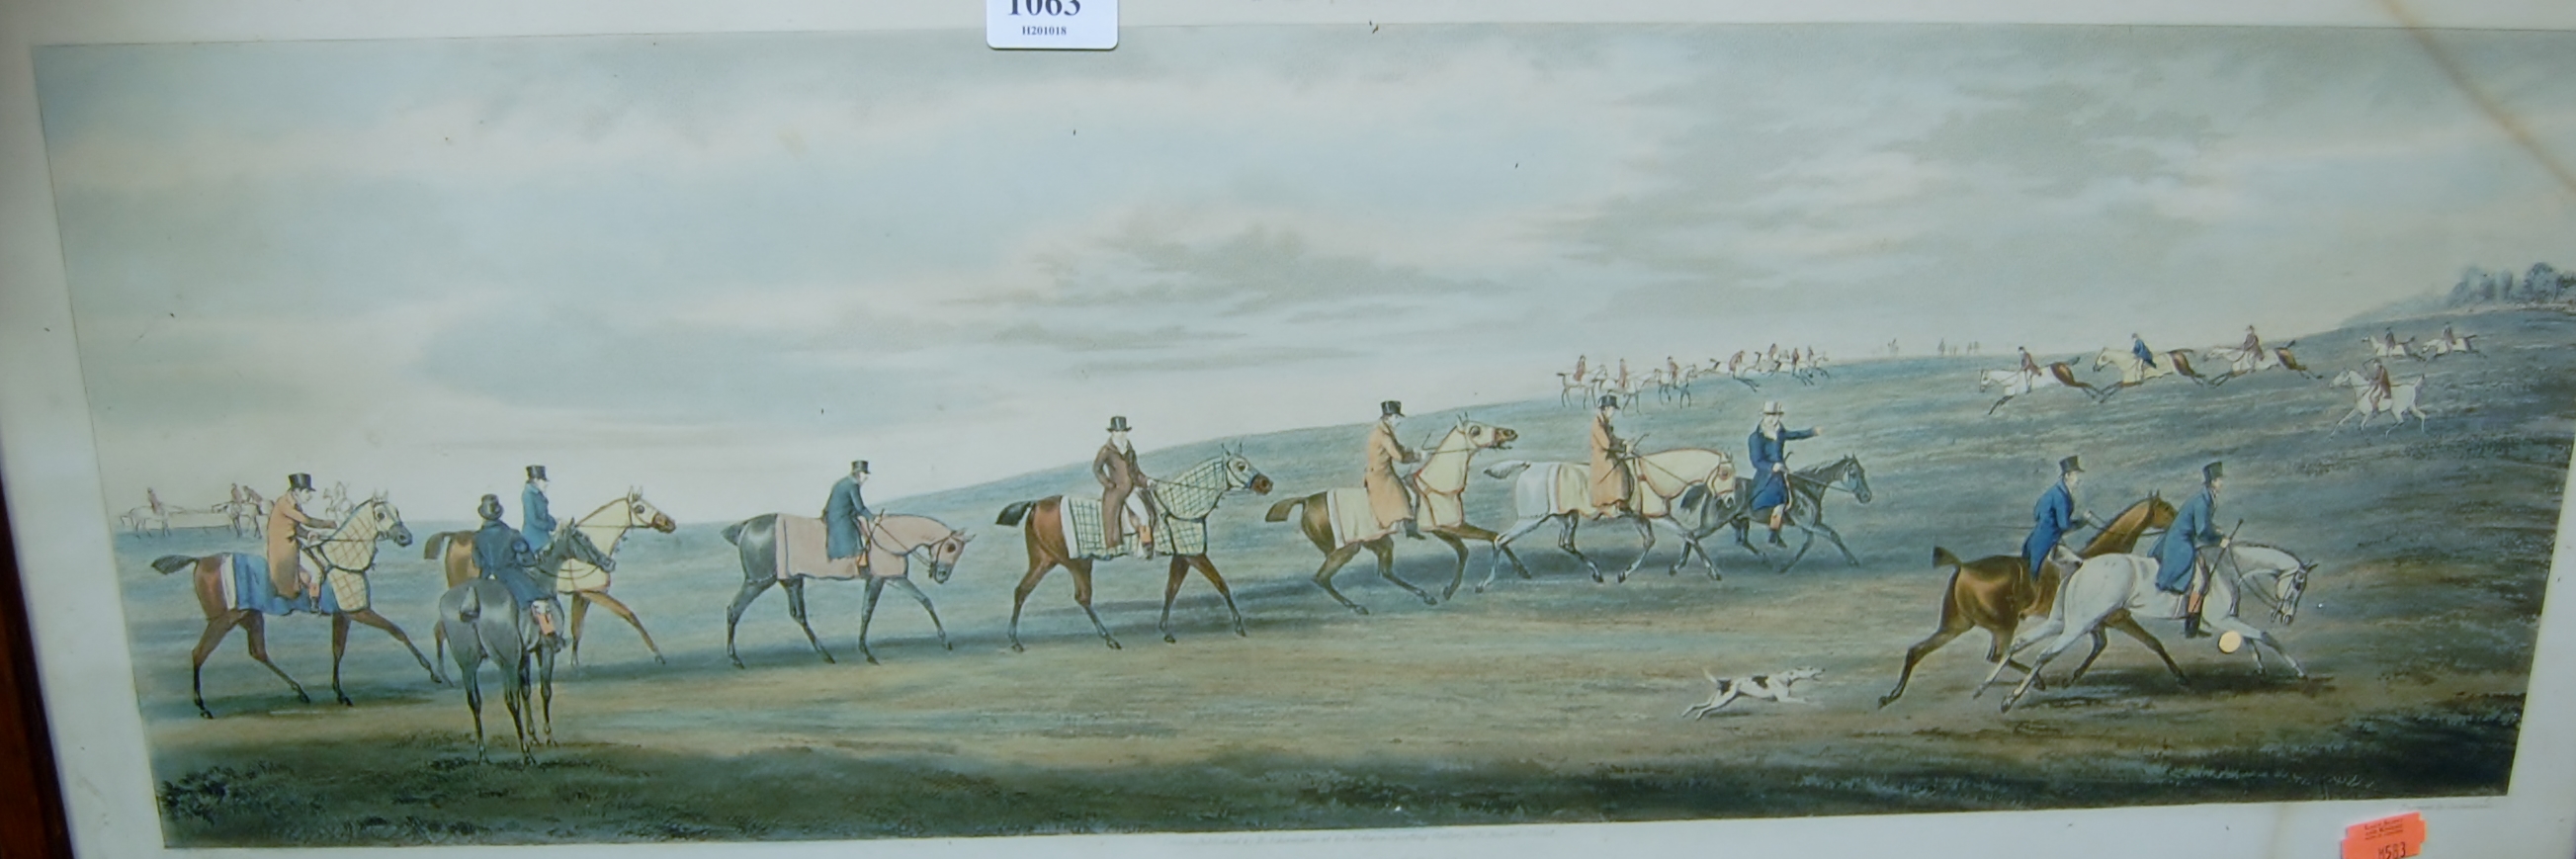 After Henry Alken - Preparing to start Ascot Heath and Training at Newmarket, two prints published